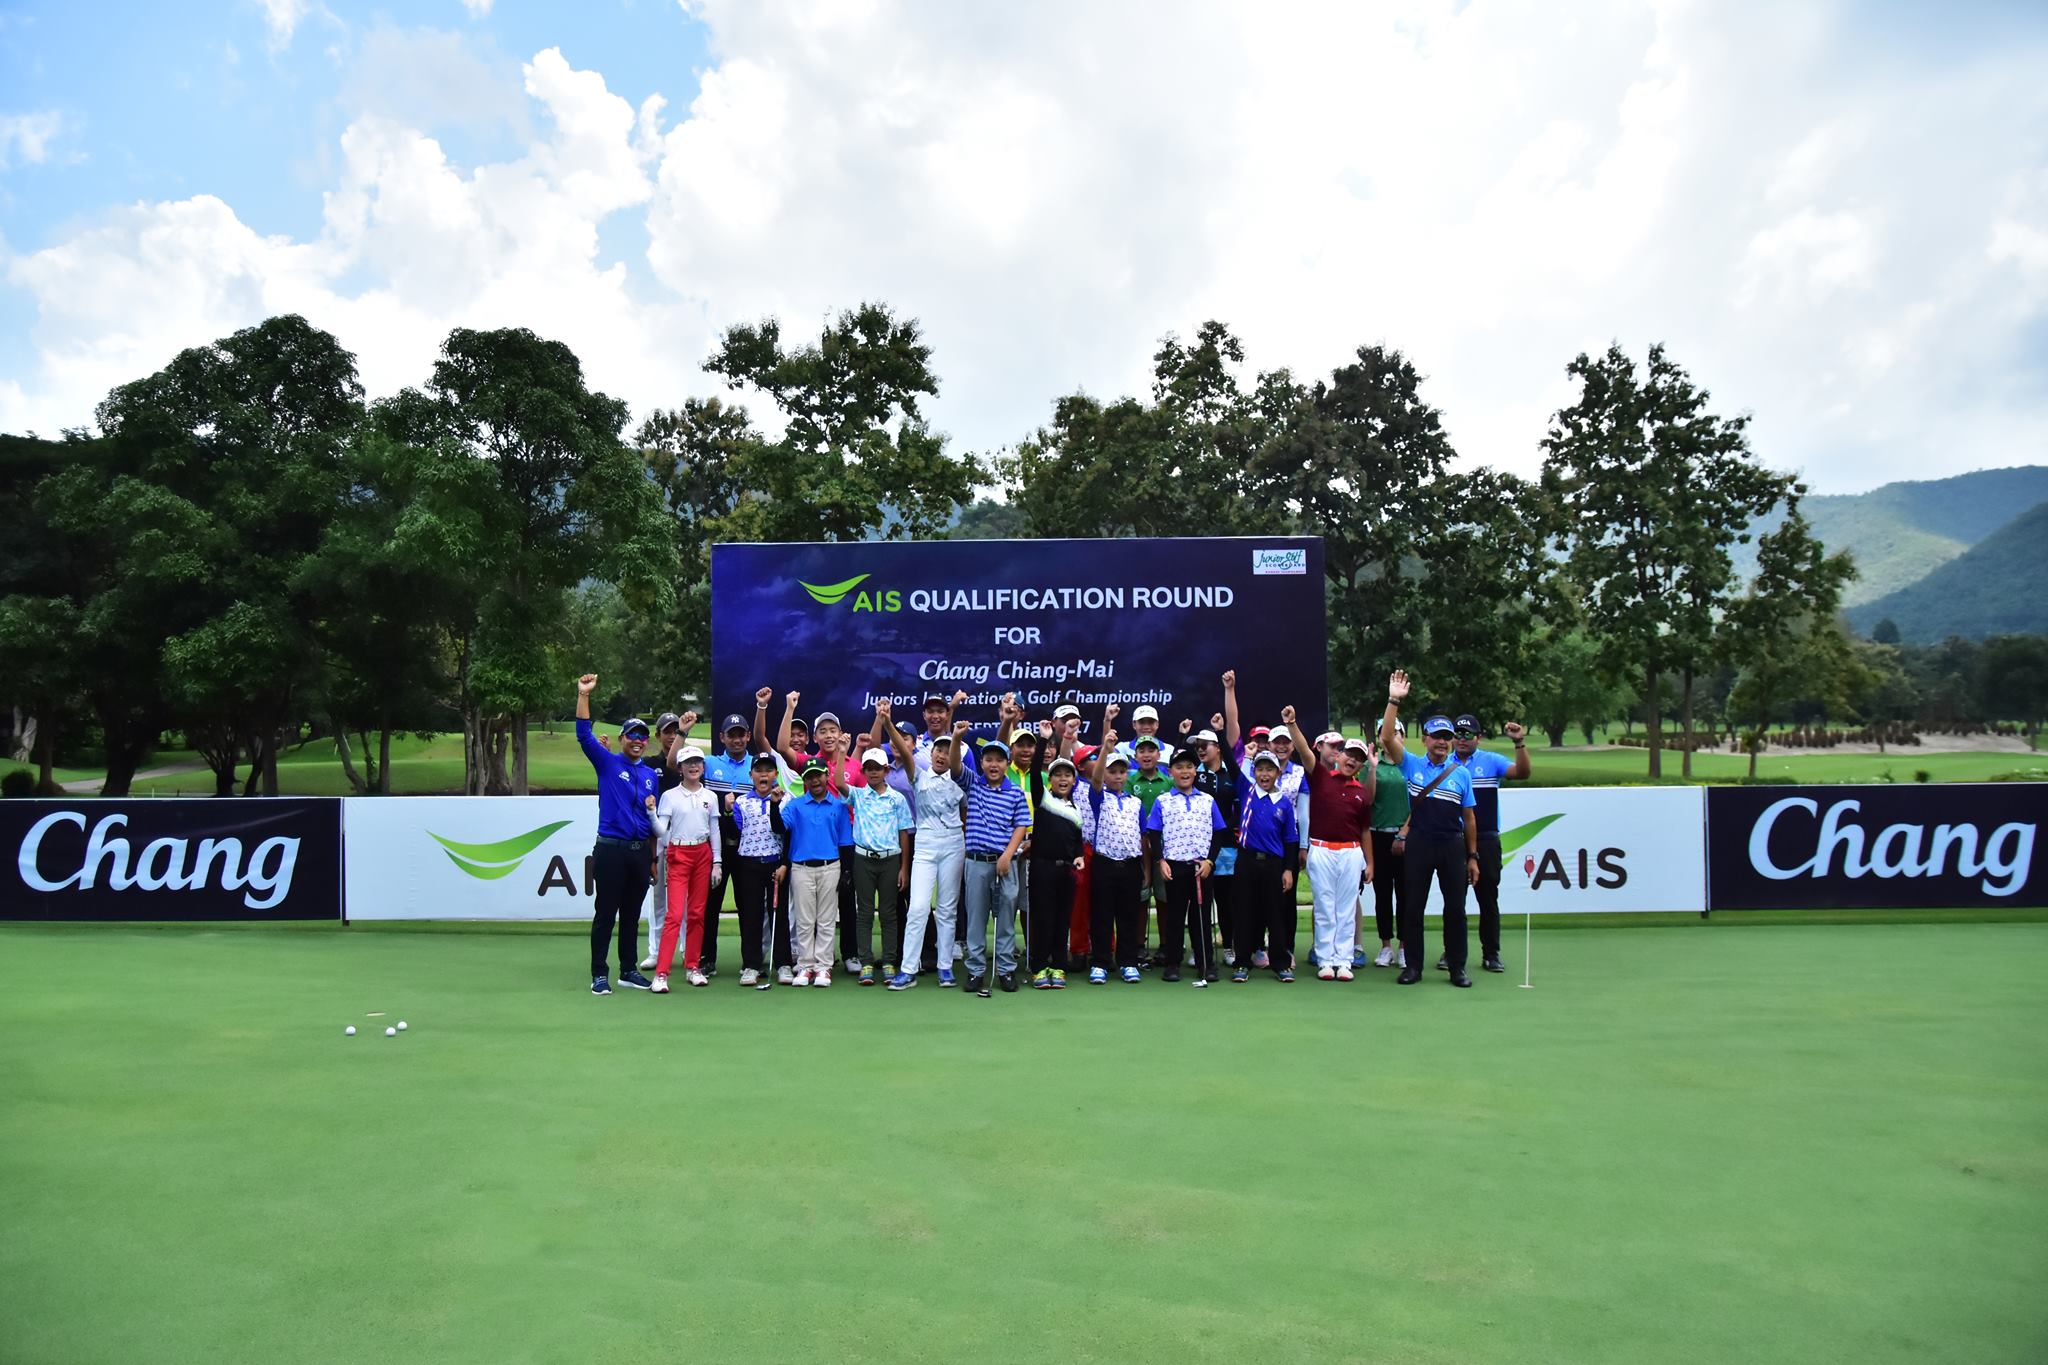 AIS Qualification Round For Chang Chiang-mai Juniors International Championship